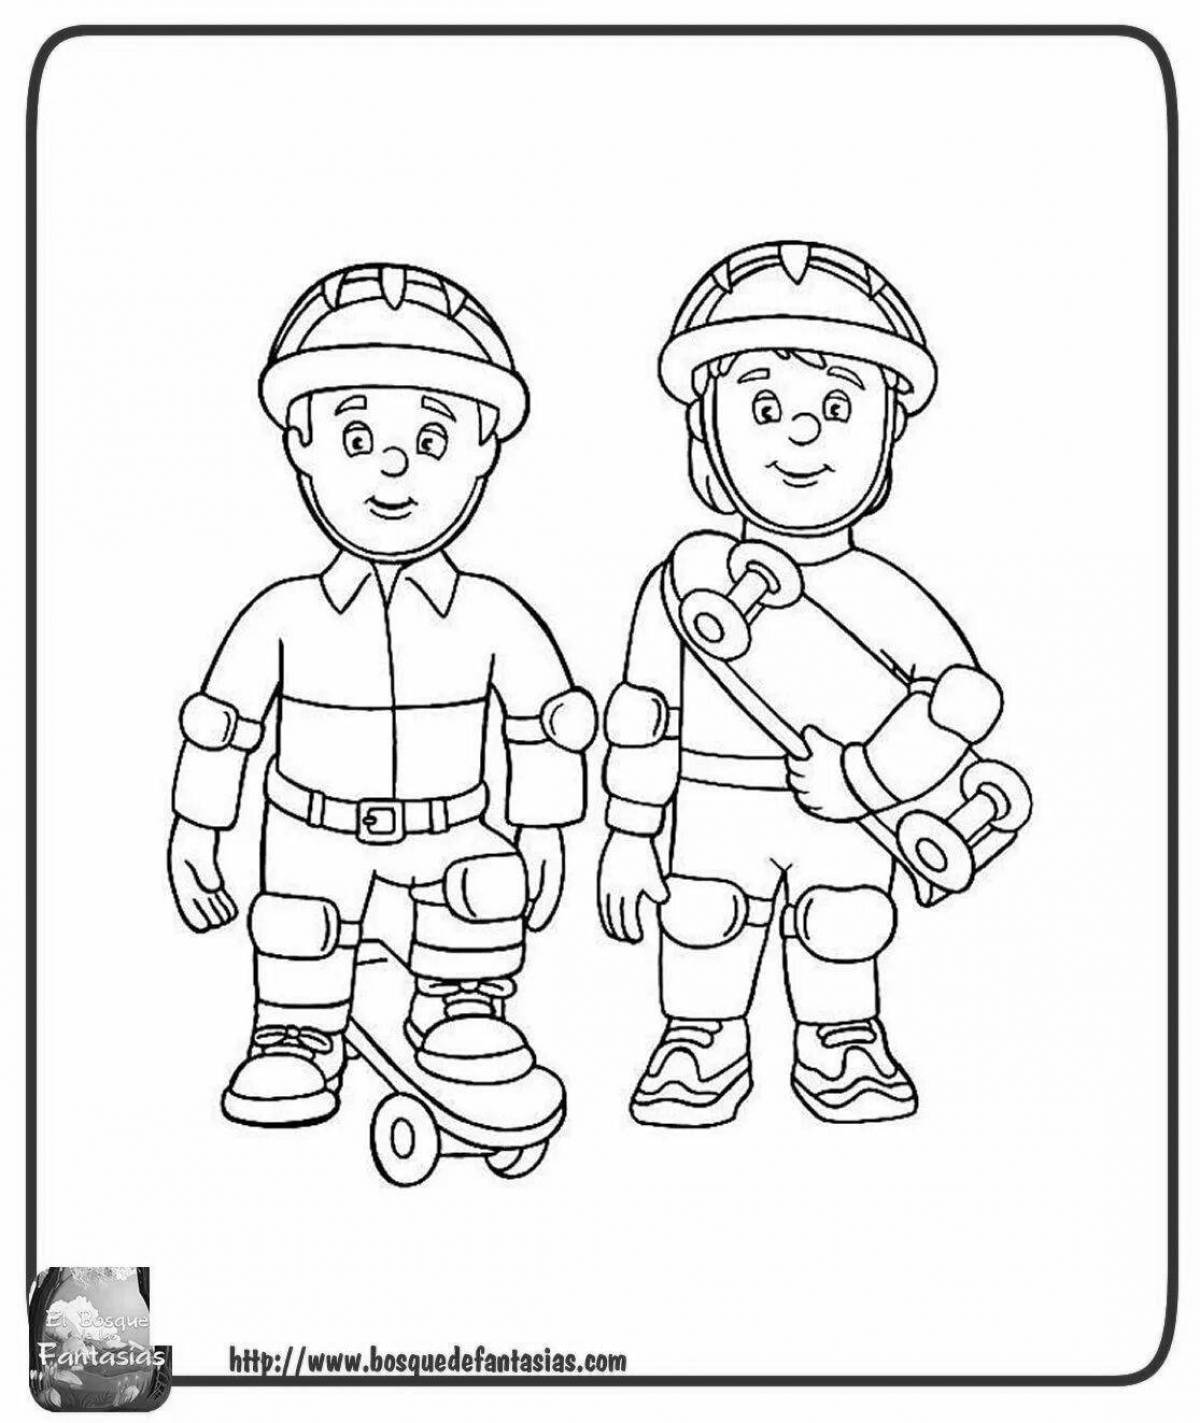 Incredible firefighter coloring book for kids